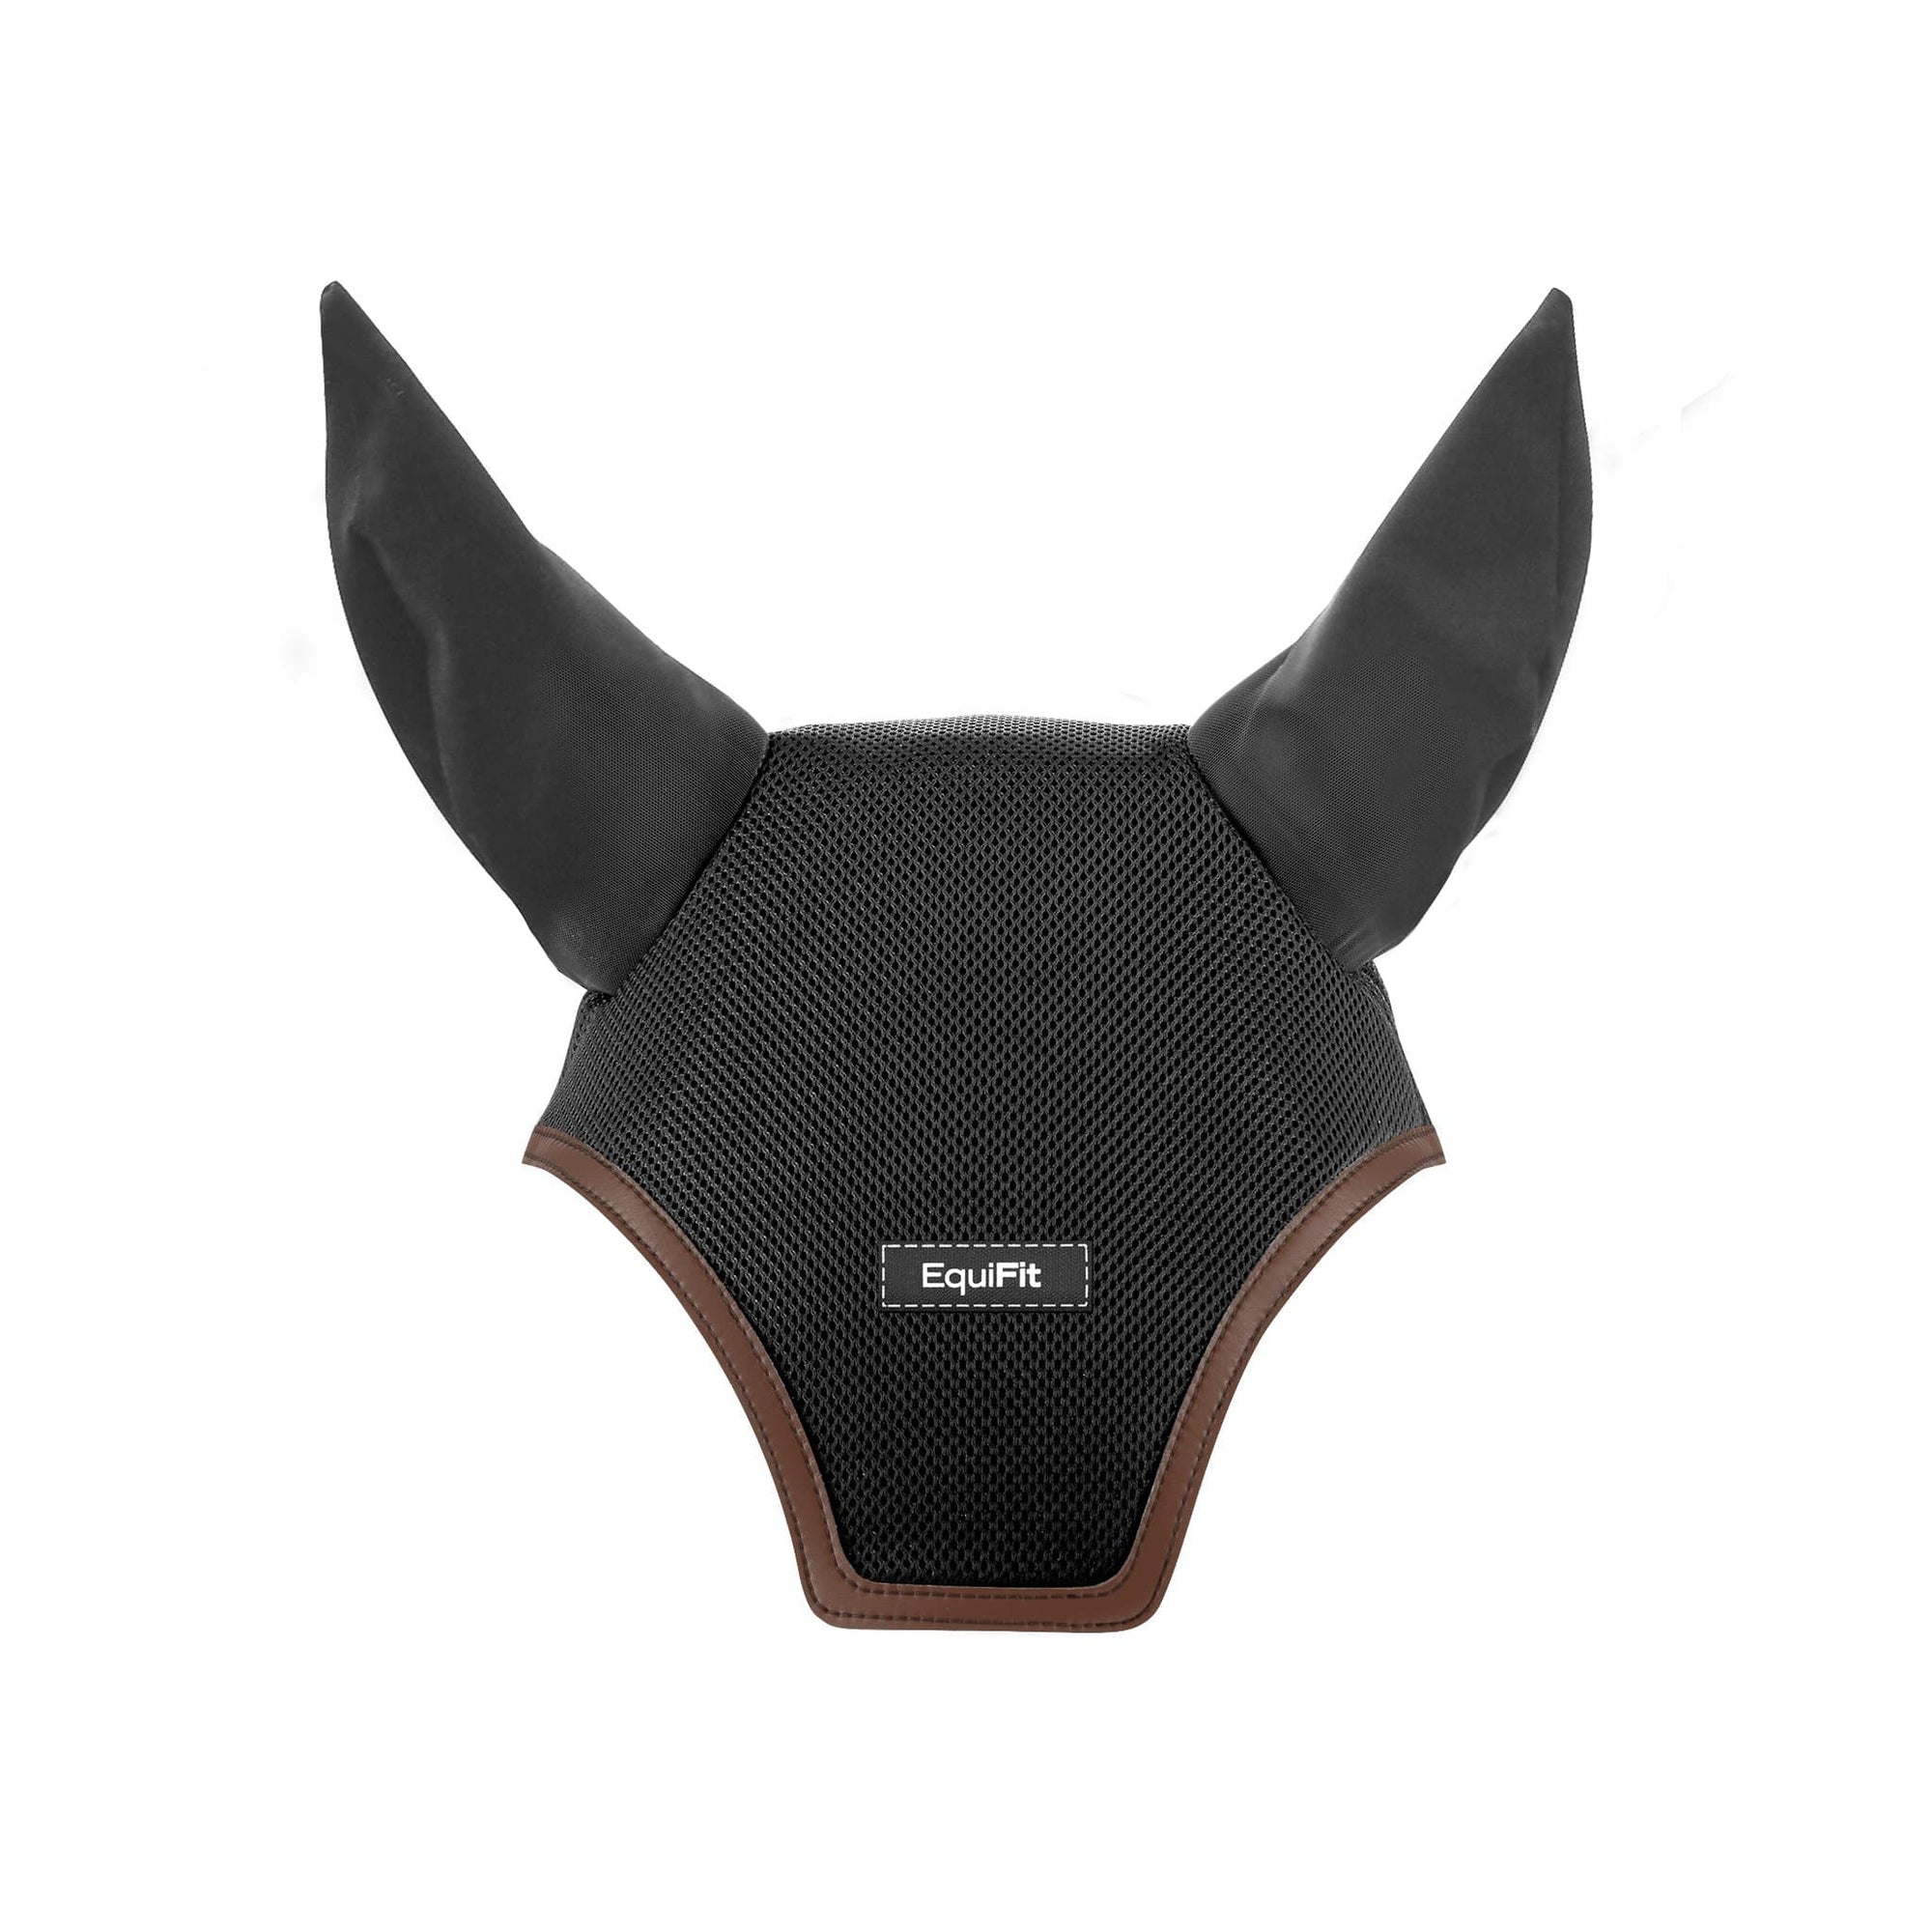 Ear Bonnets are constructed from multi-dimensional air-mesh to keep the head cool and dry, with spandex mesh ears that ensure a comfortable fit. 